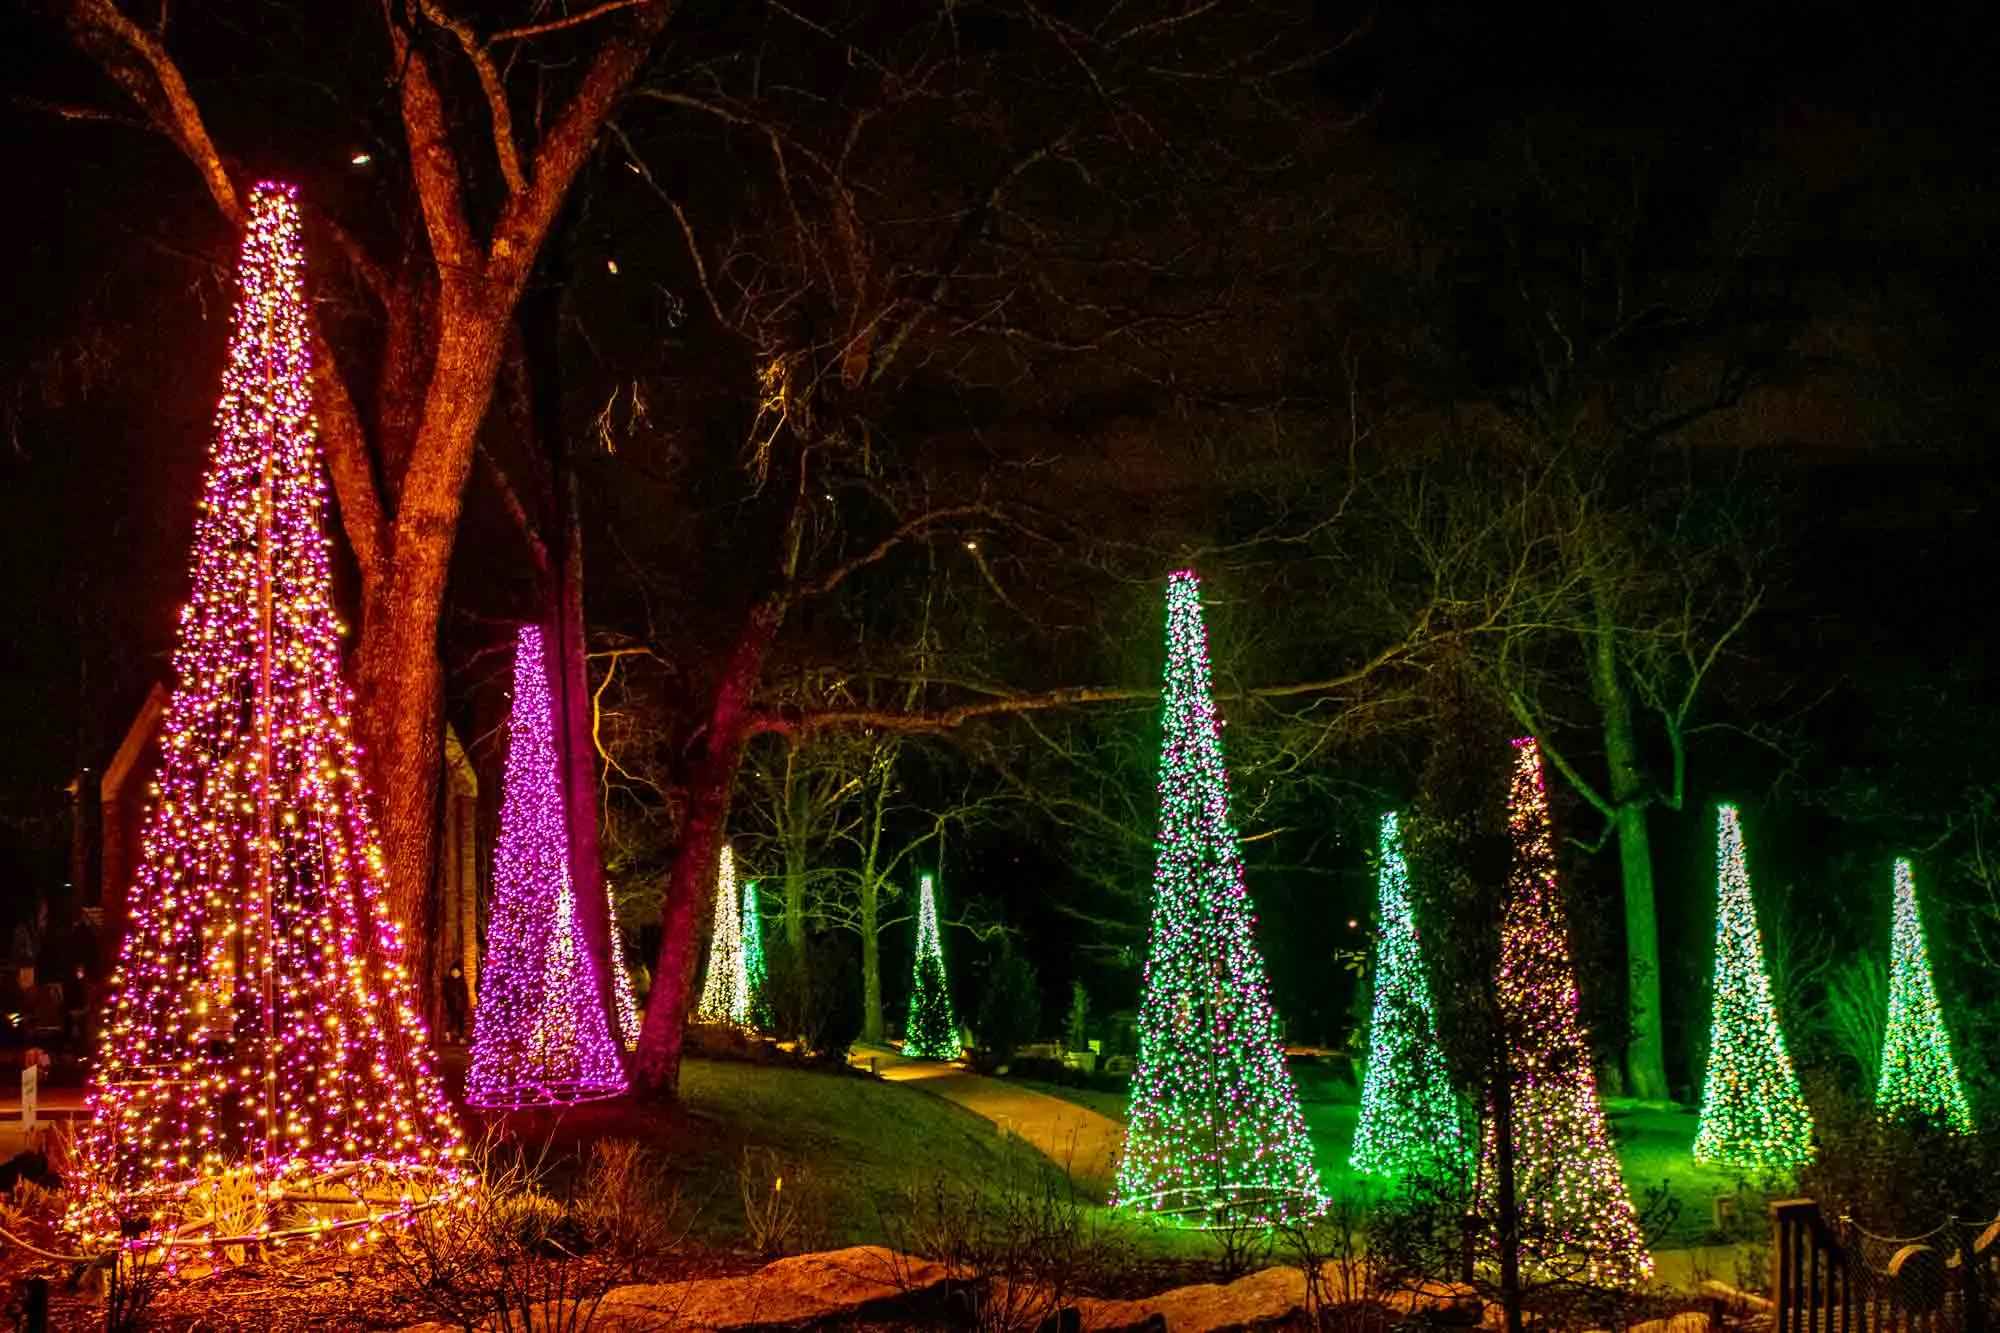 Green, pink, and white lights strung in the shape of Christmas trees